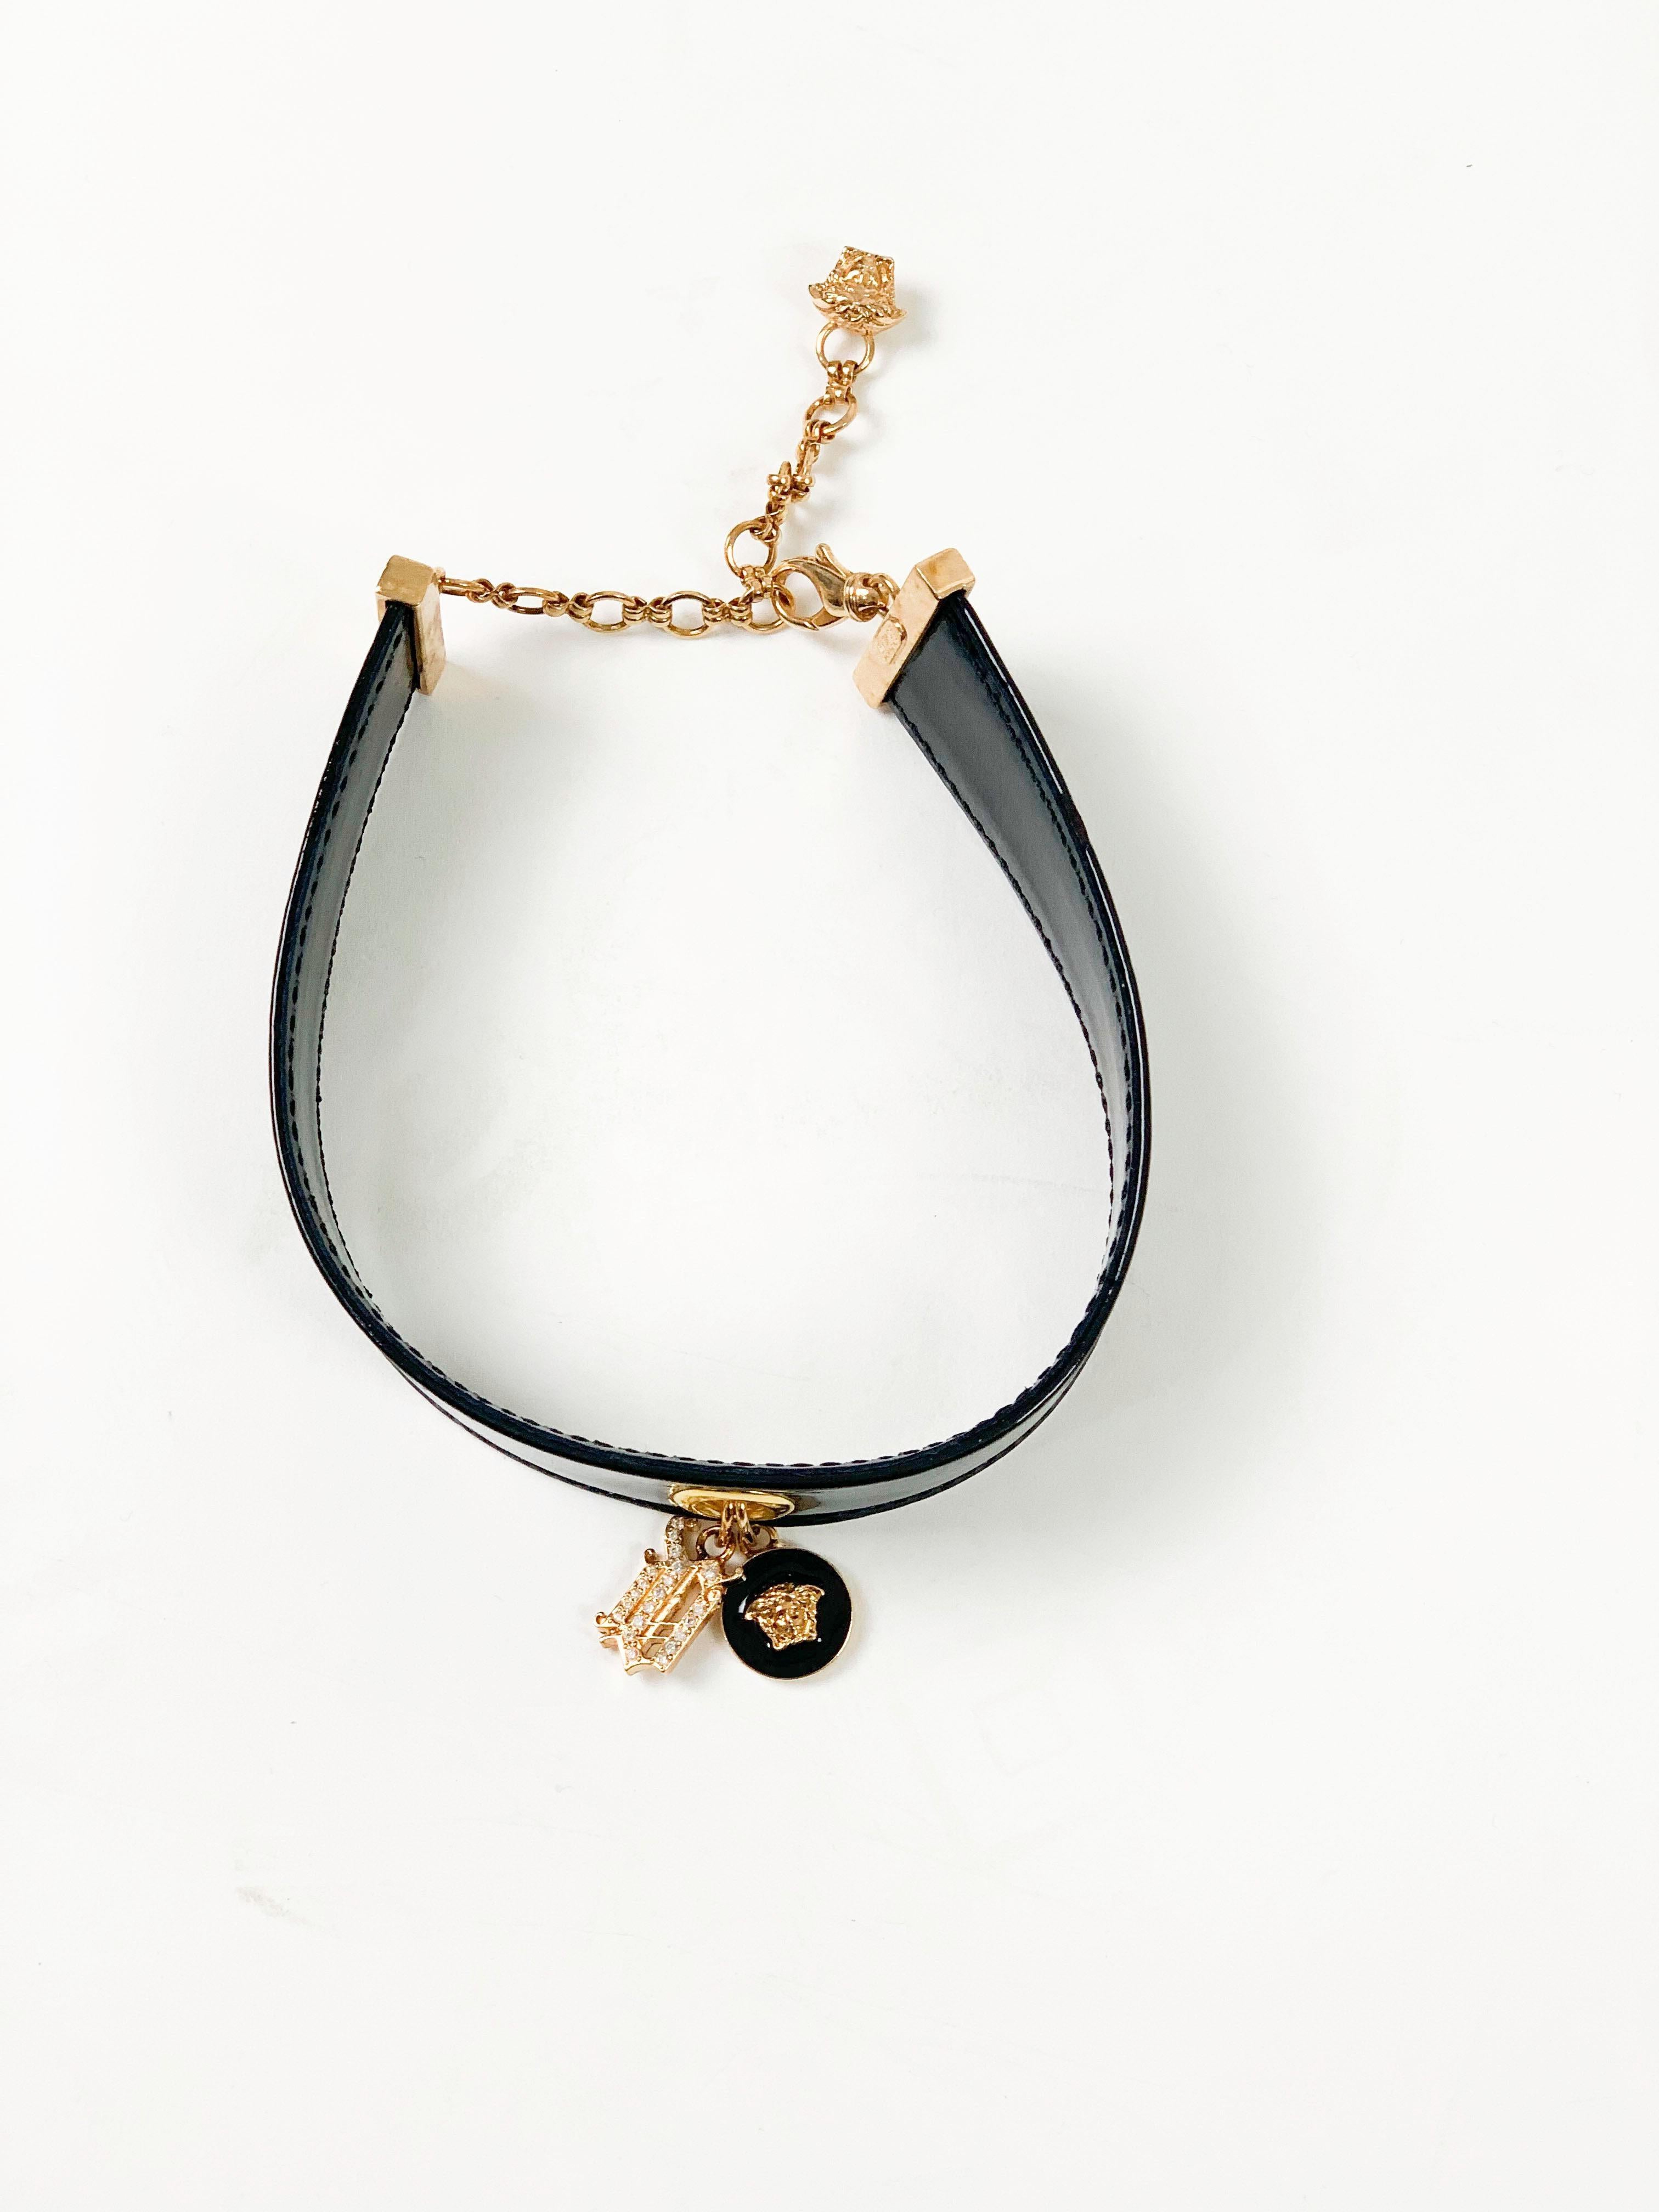 Famous for his edgy and breaking the boundaries style, Gianni Versace always created items to turn heads. This patent leather choker is just that. Made in Italy the choker features a wide patent leather strap with two gold tone pendants. One the